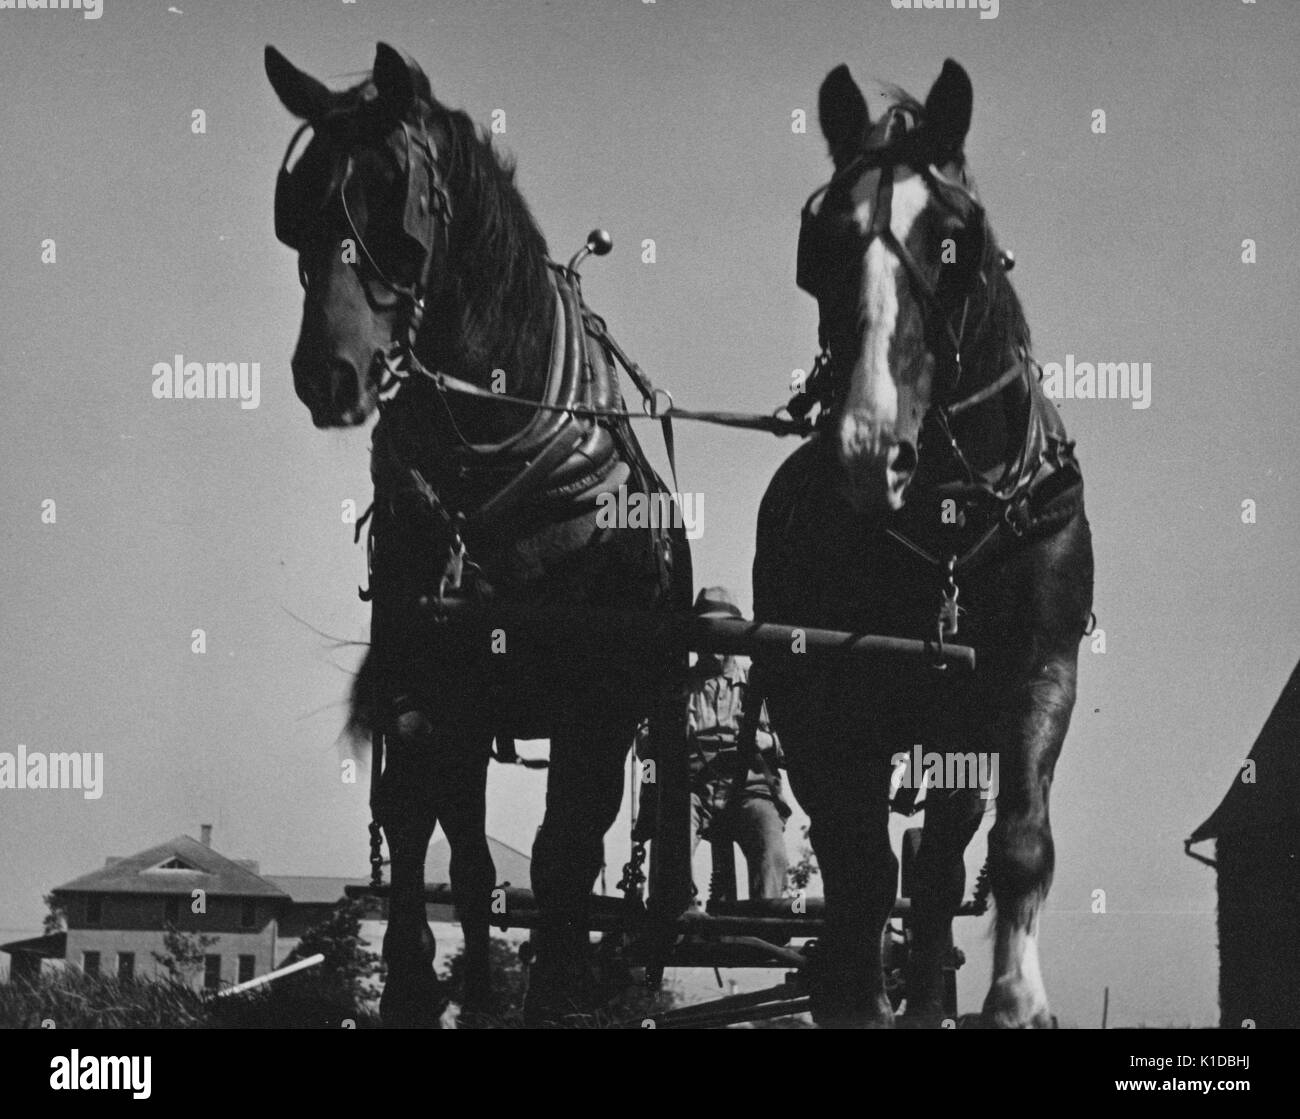 Team of two work horses hitched to a wagon, farm house visible in the background, low-angle view, Beltsville, Maryland, 1935. From the New York Public Library. Stock Photo